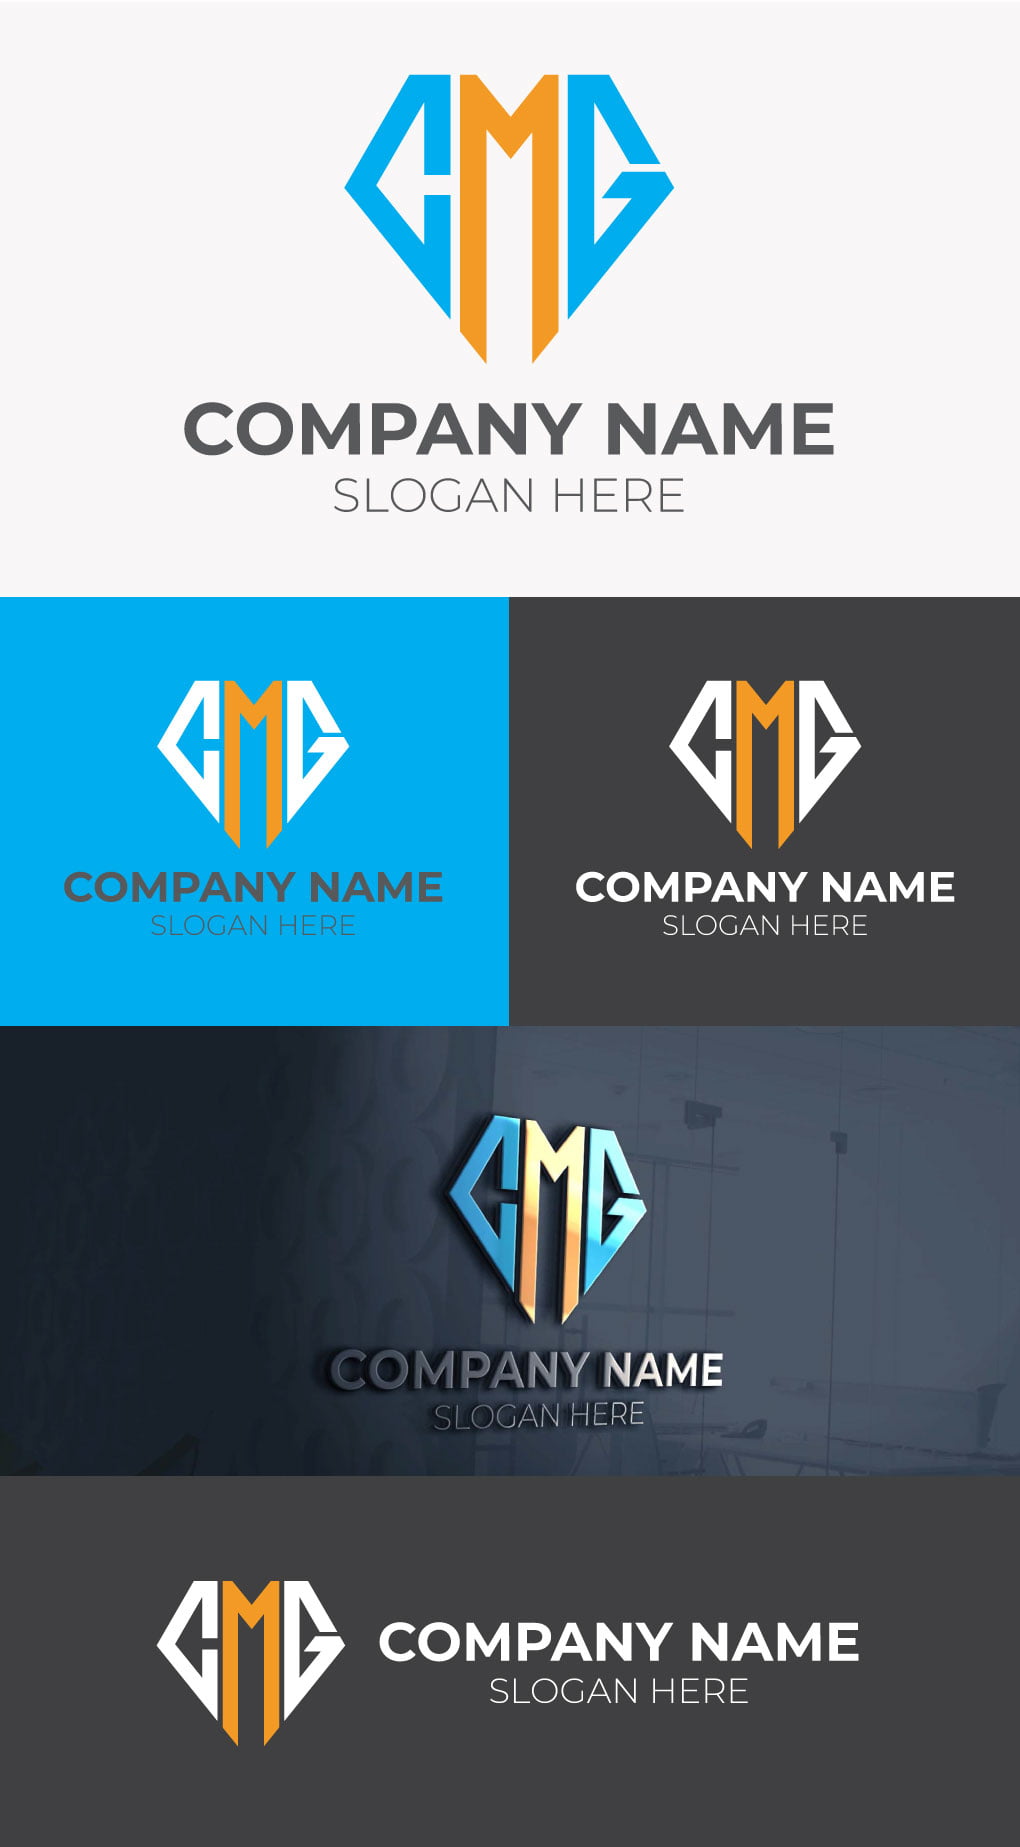 CMG LETTER LOGO FREE TEMPLATE